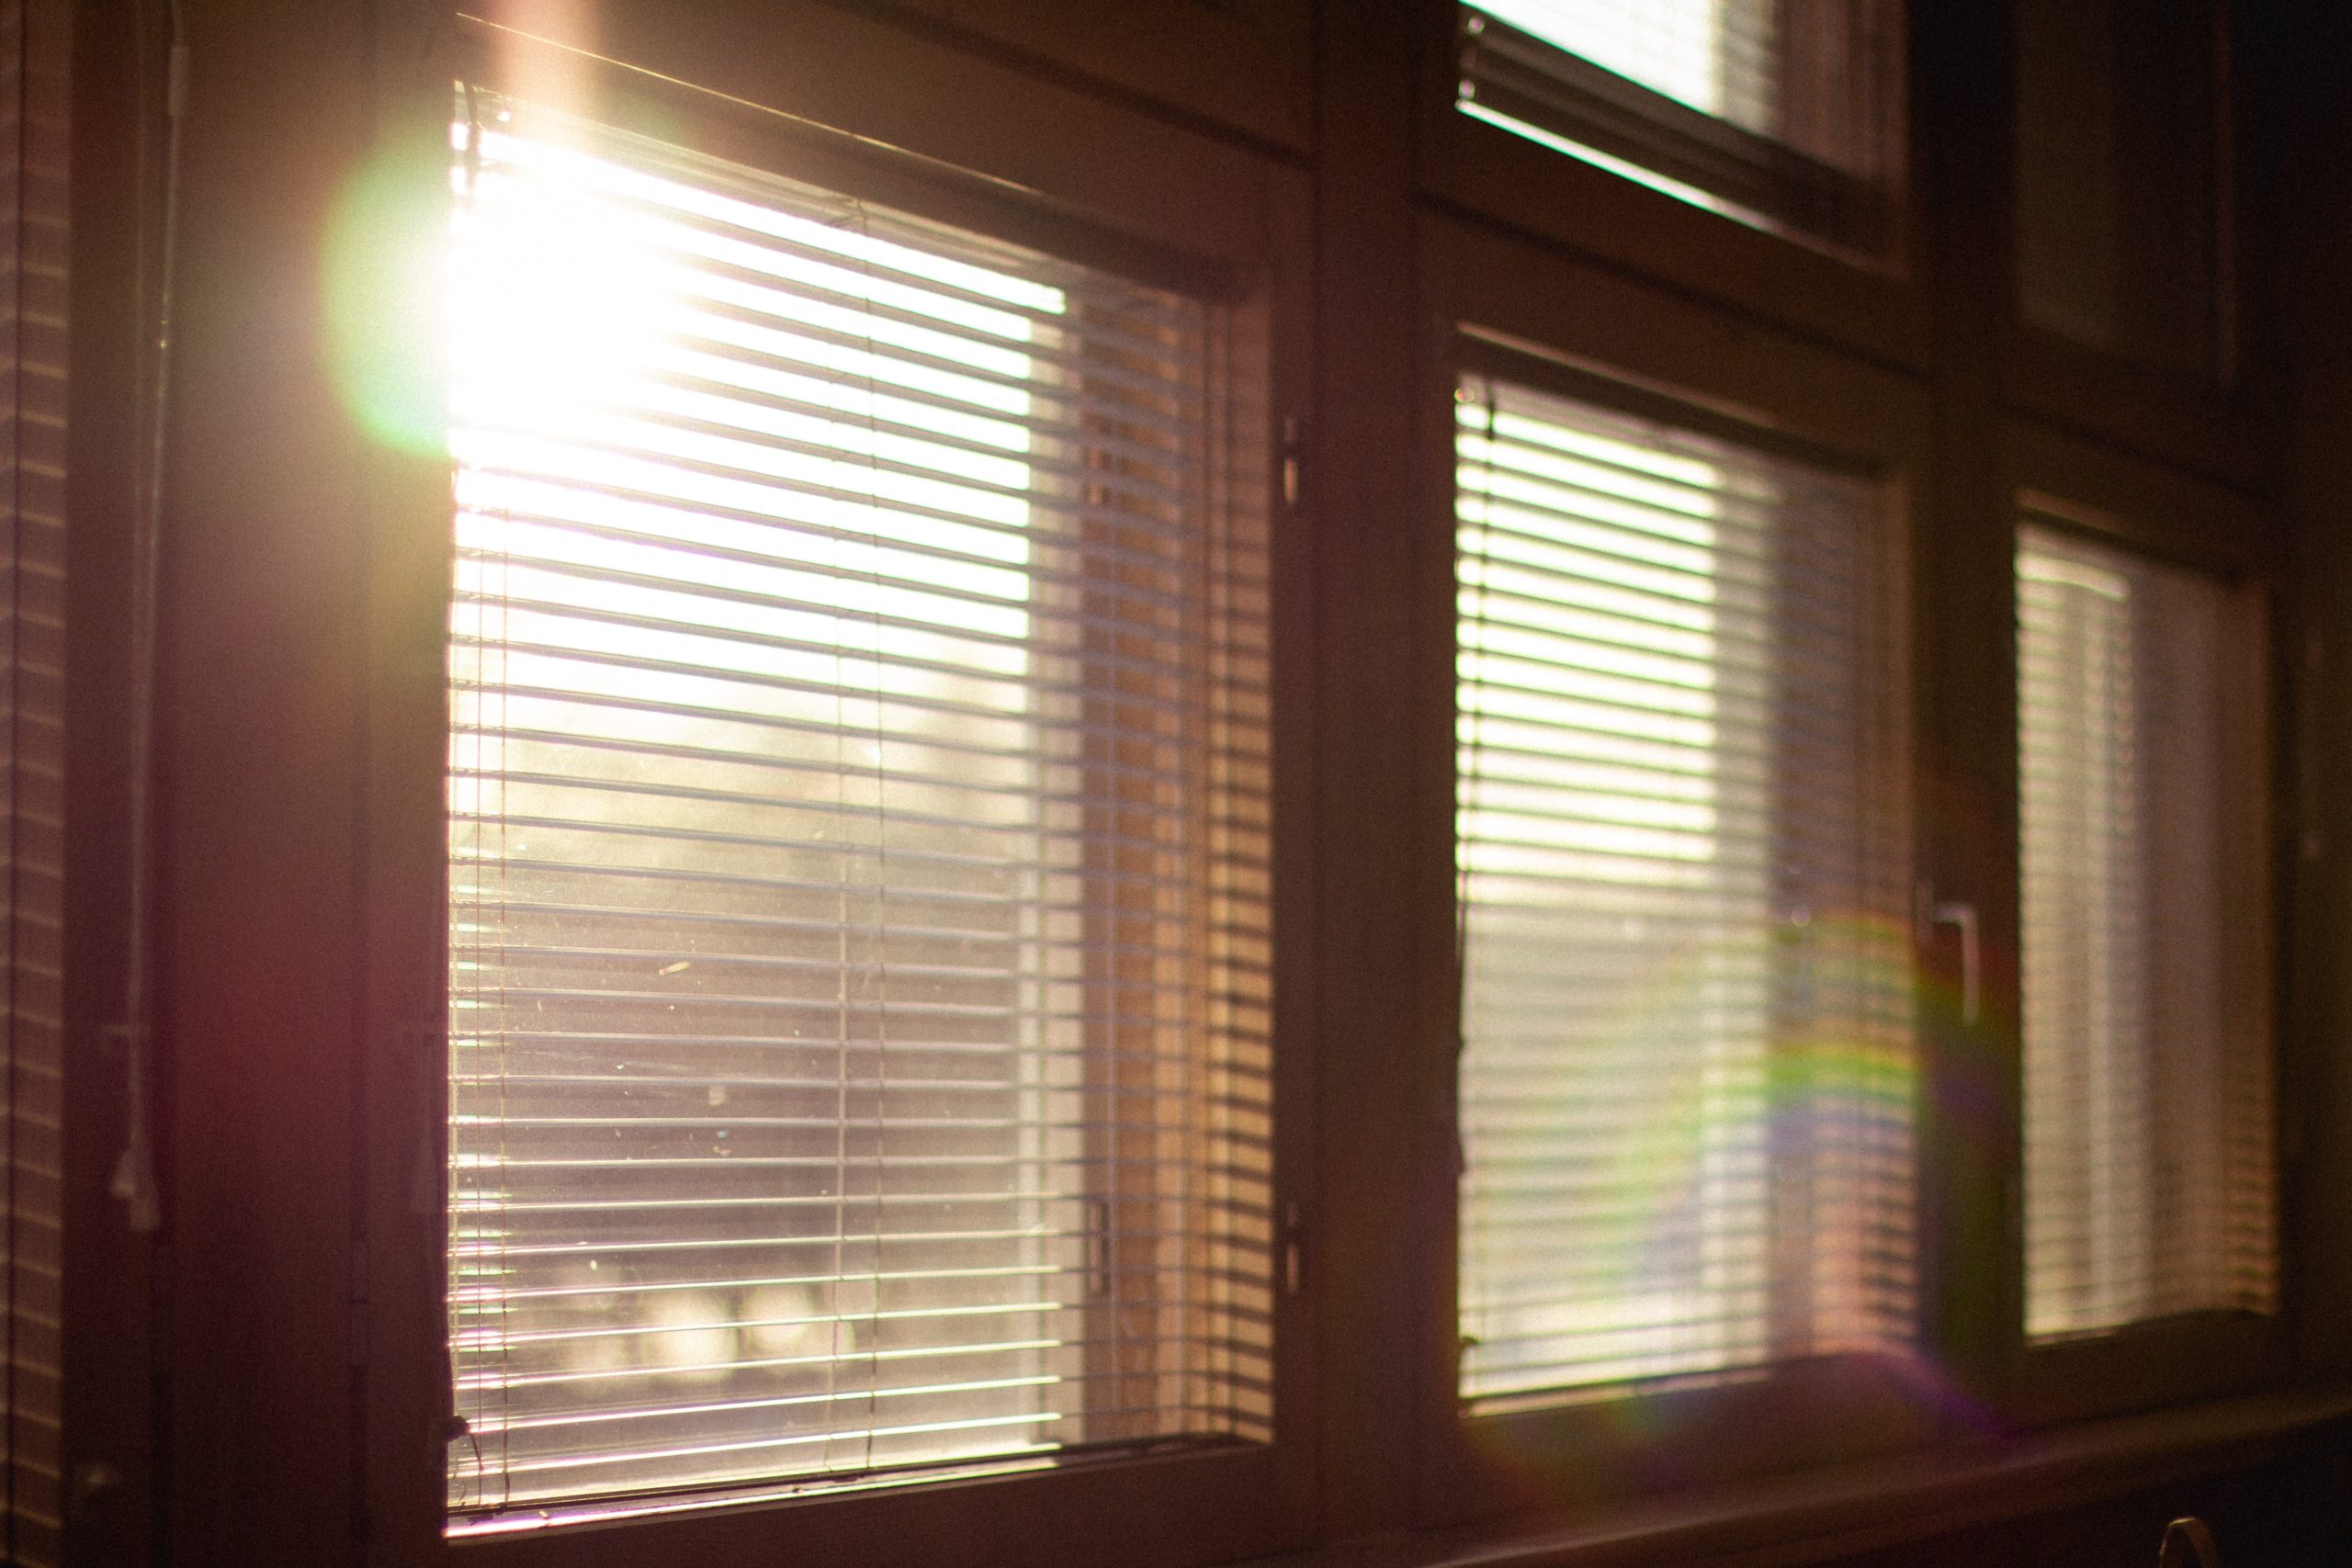 Window blinds with sun shining in.